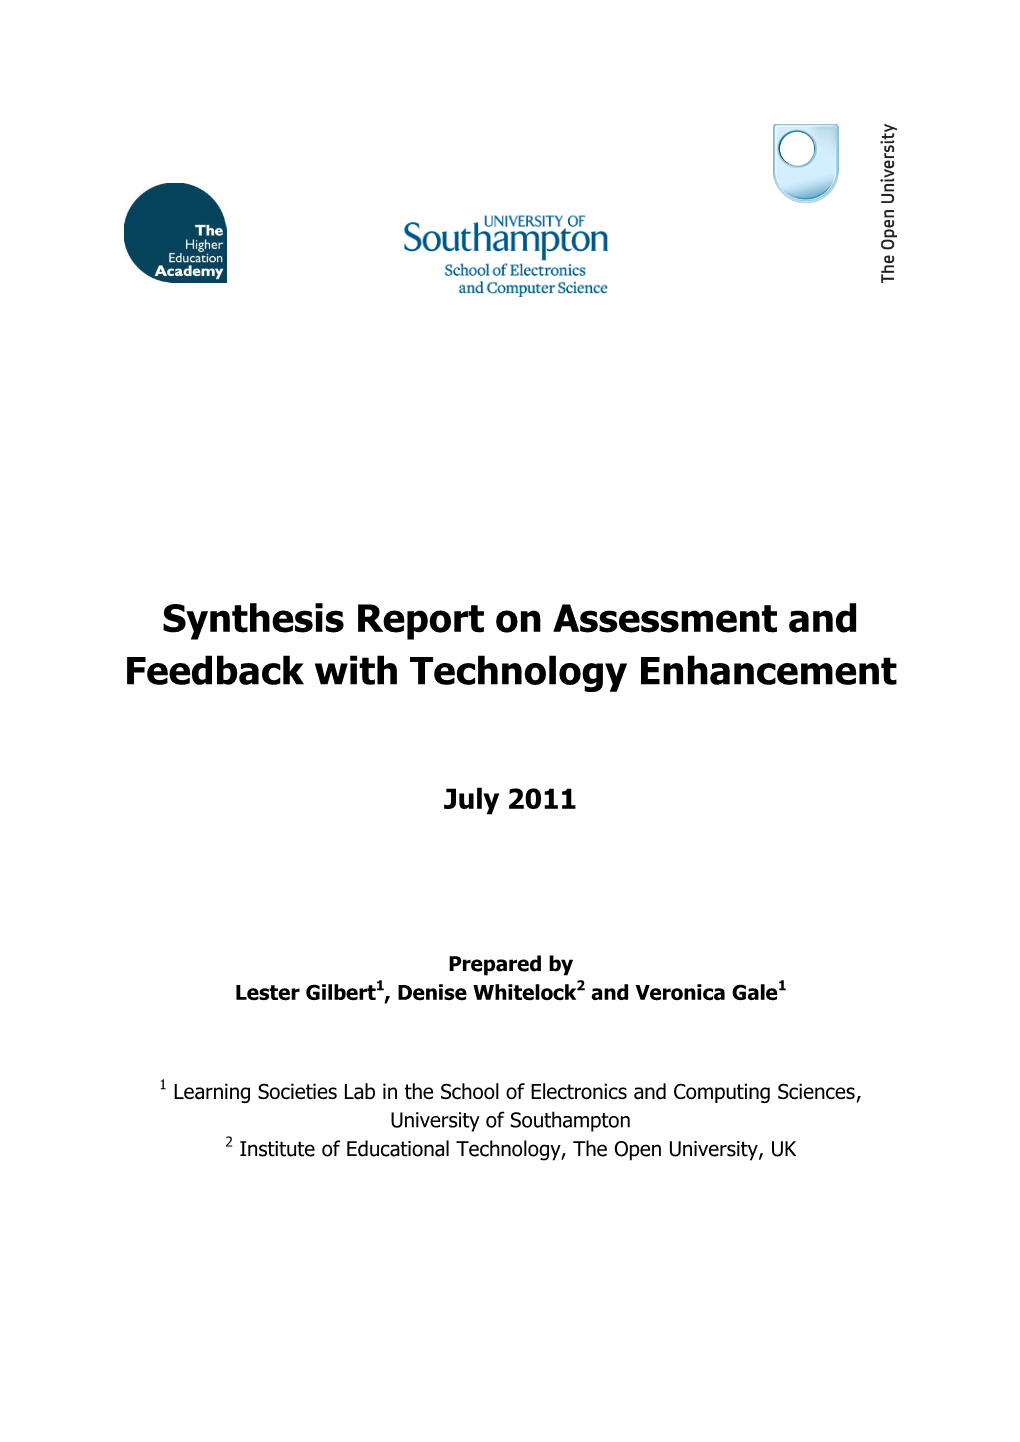 Synthesis Report on Assessment and Feedback with Technology Enhancement